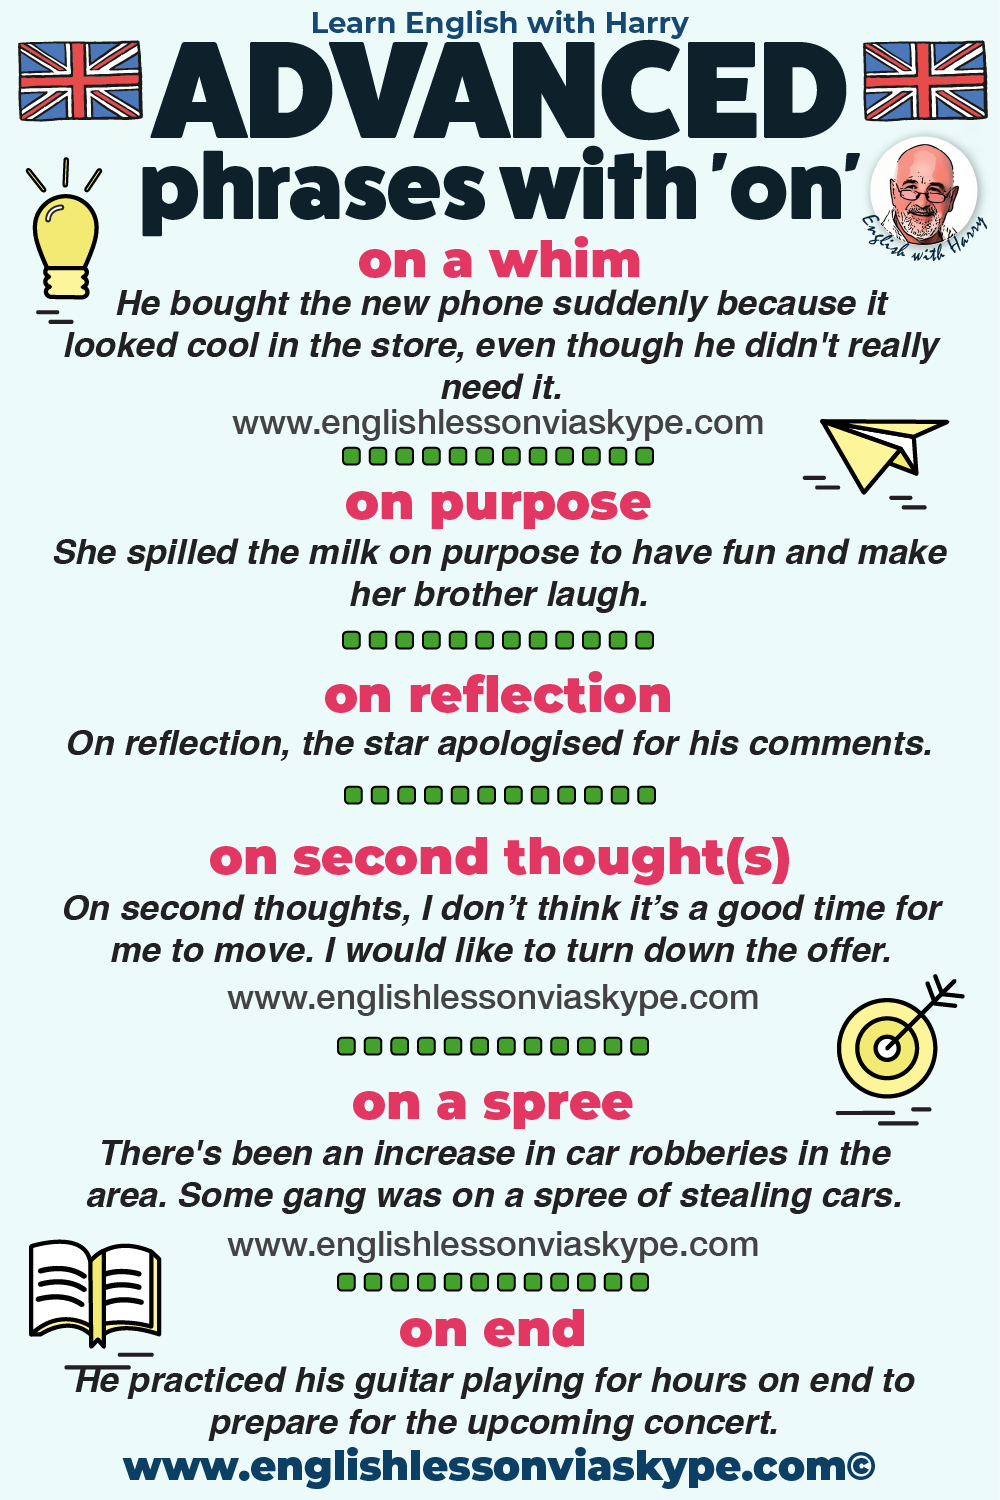 Preposition On: Essential Phrases For Everyday Use. English speaking skills. Improve English speaking skills. Upgrade your vocabulary. English grammar rules. Improve English speaking. Advanced English lessons on Zoom and Skype. Improve English speaking and writing skills. #learnenglish